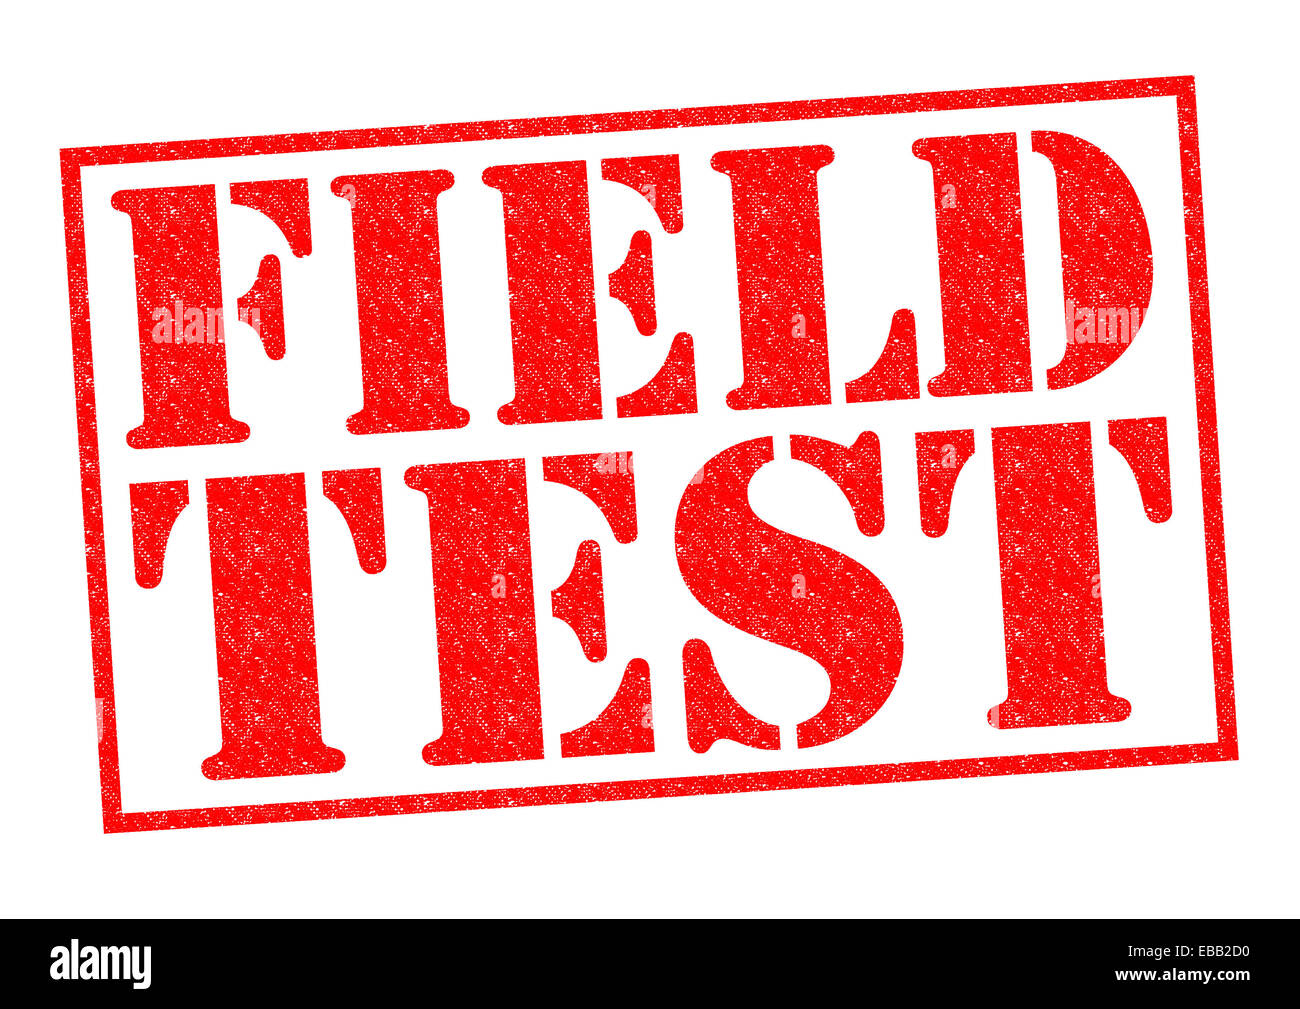 FIELD TEST red Rubber Stamp over a white background. Stock Photo